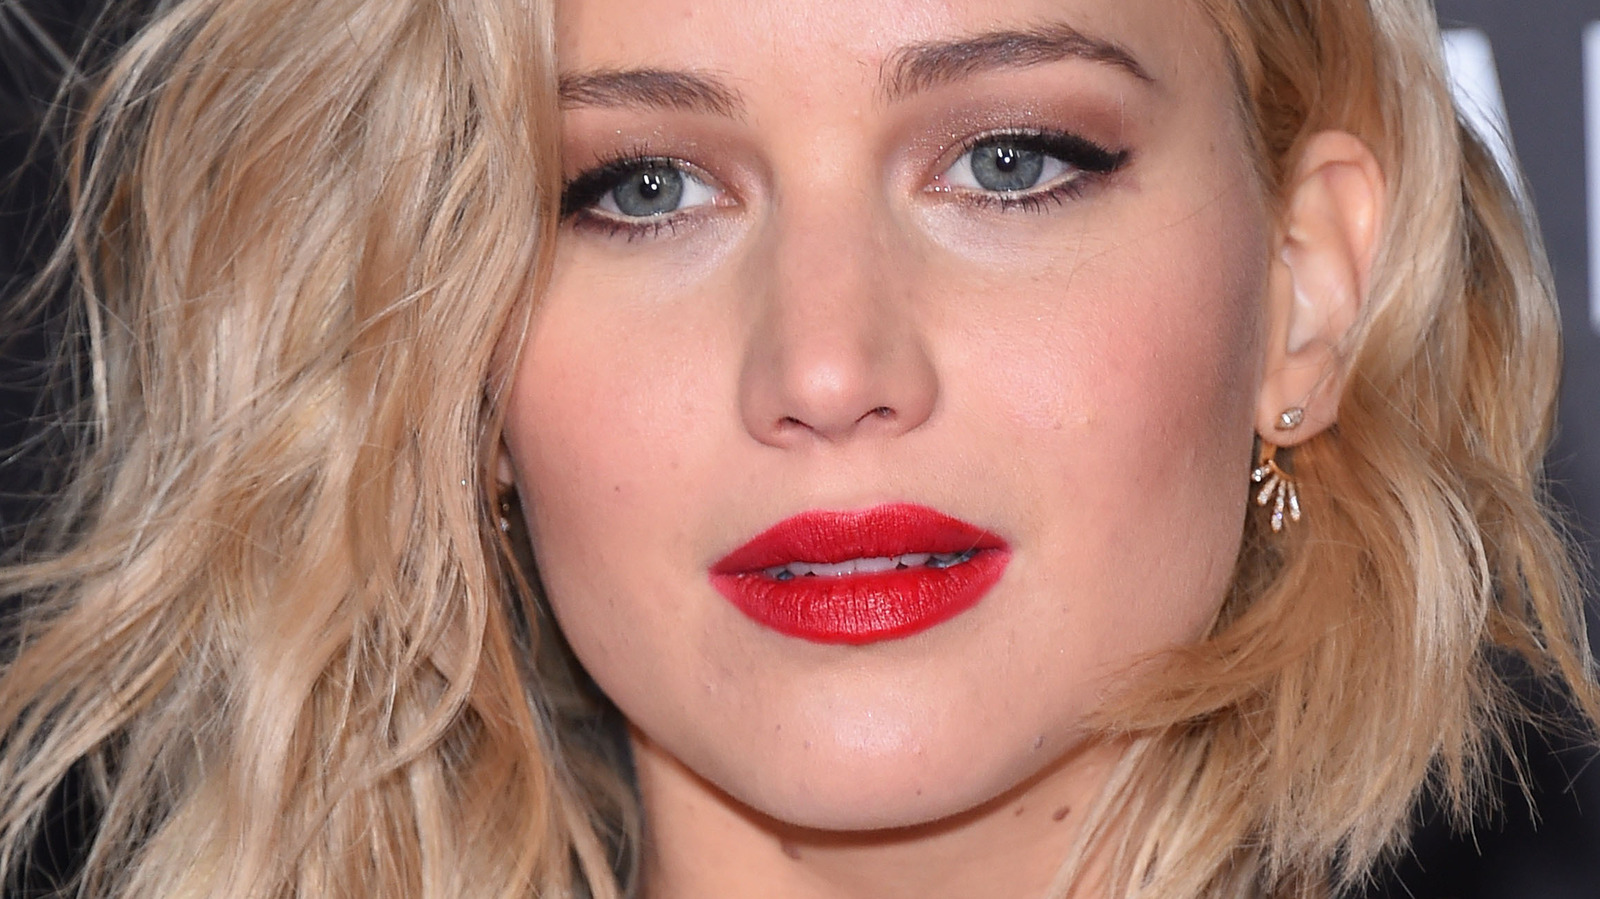 Why Liam Hemsworth Hated Kissing Jennifer Lawrence In The Hunger Games